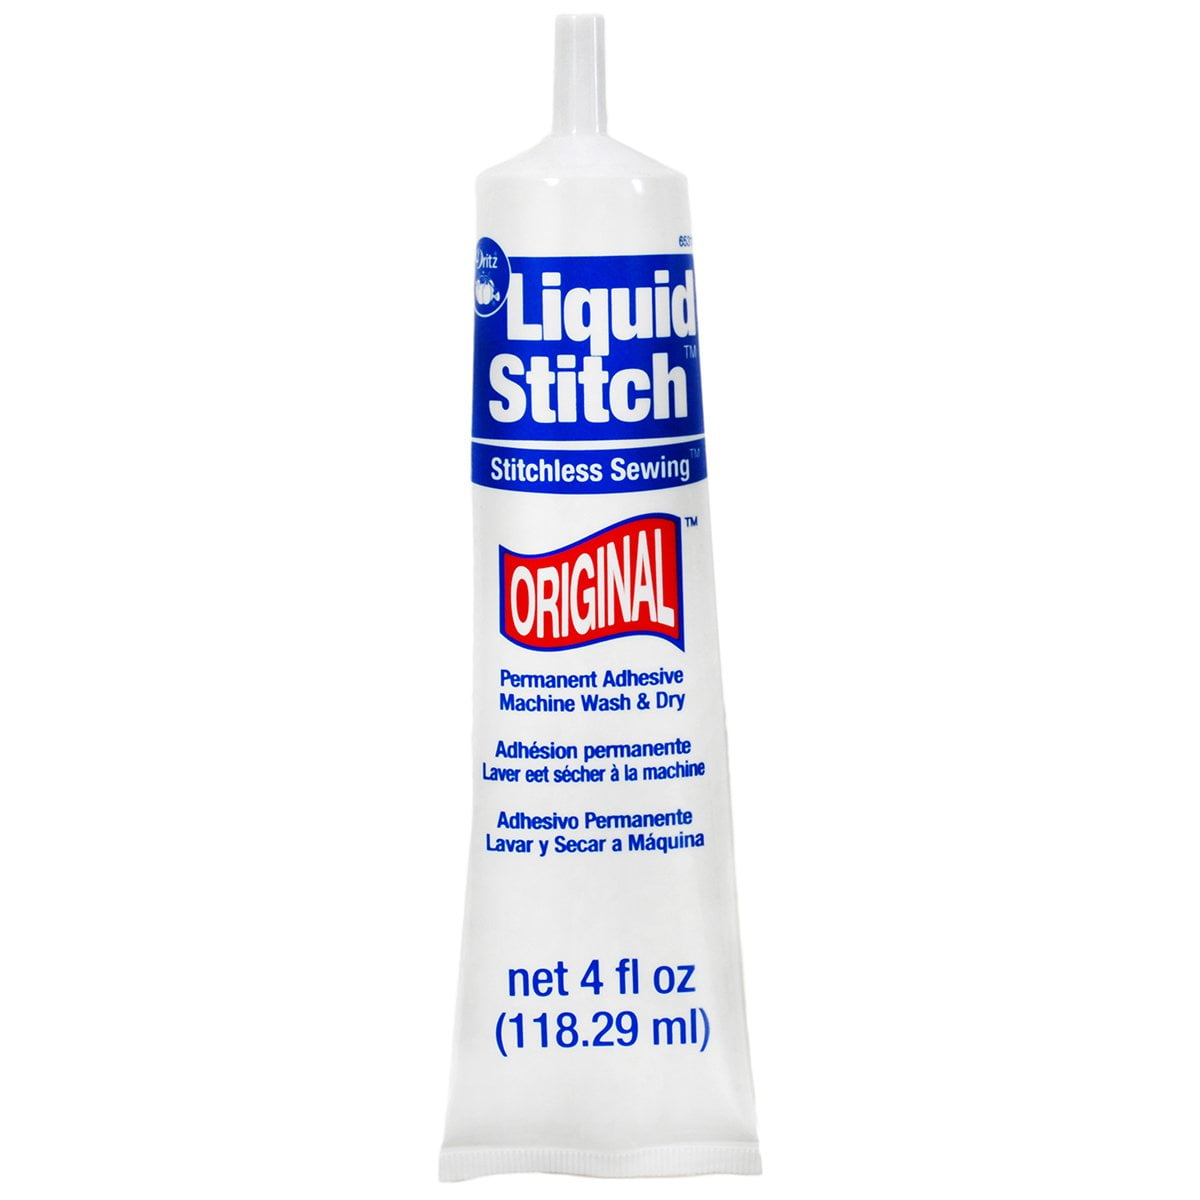 Get a Real Discount Dritz Liquid Stitch Fabric Mender - 1.69 oz (50mL) -  394 with wholesale prices